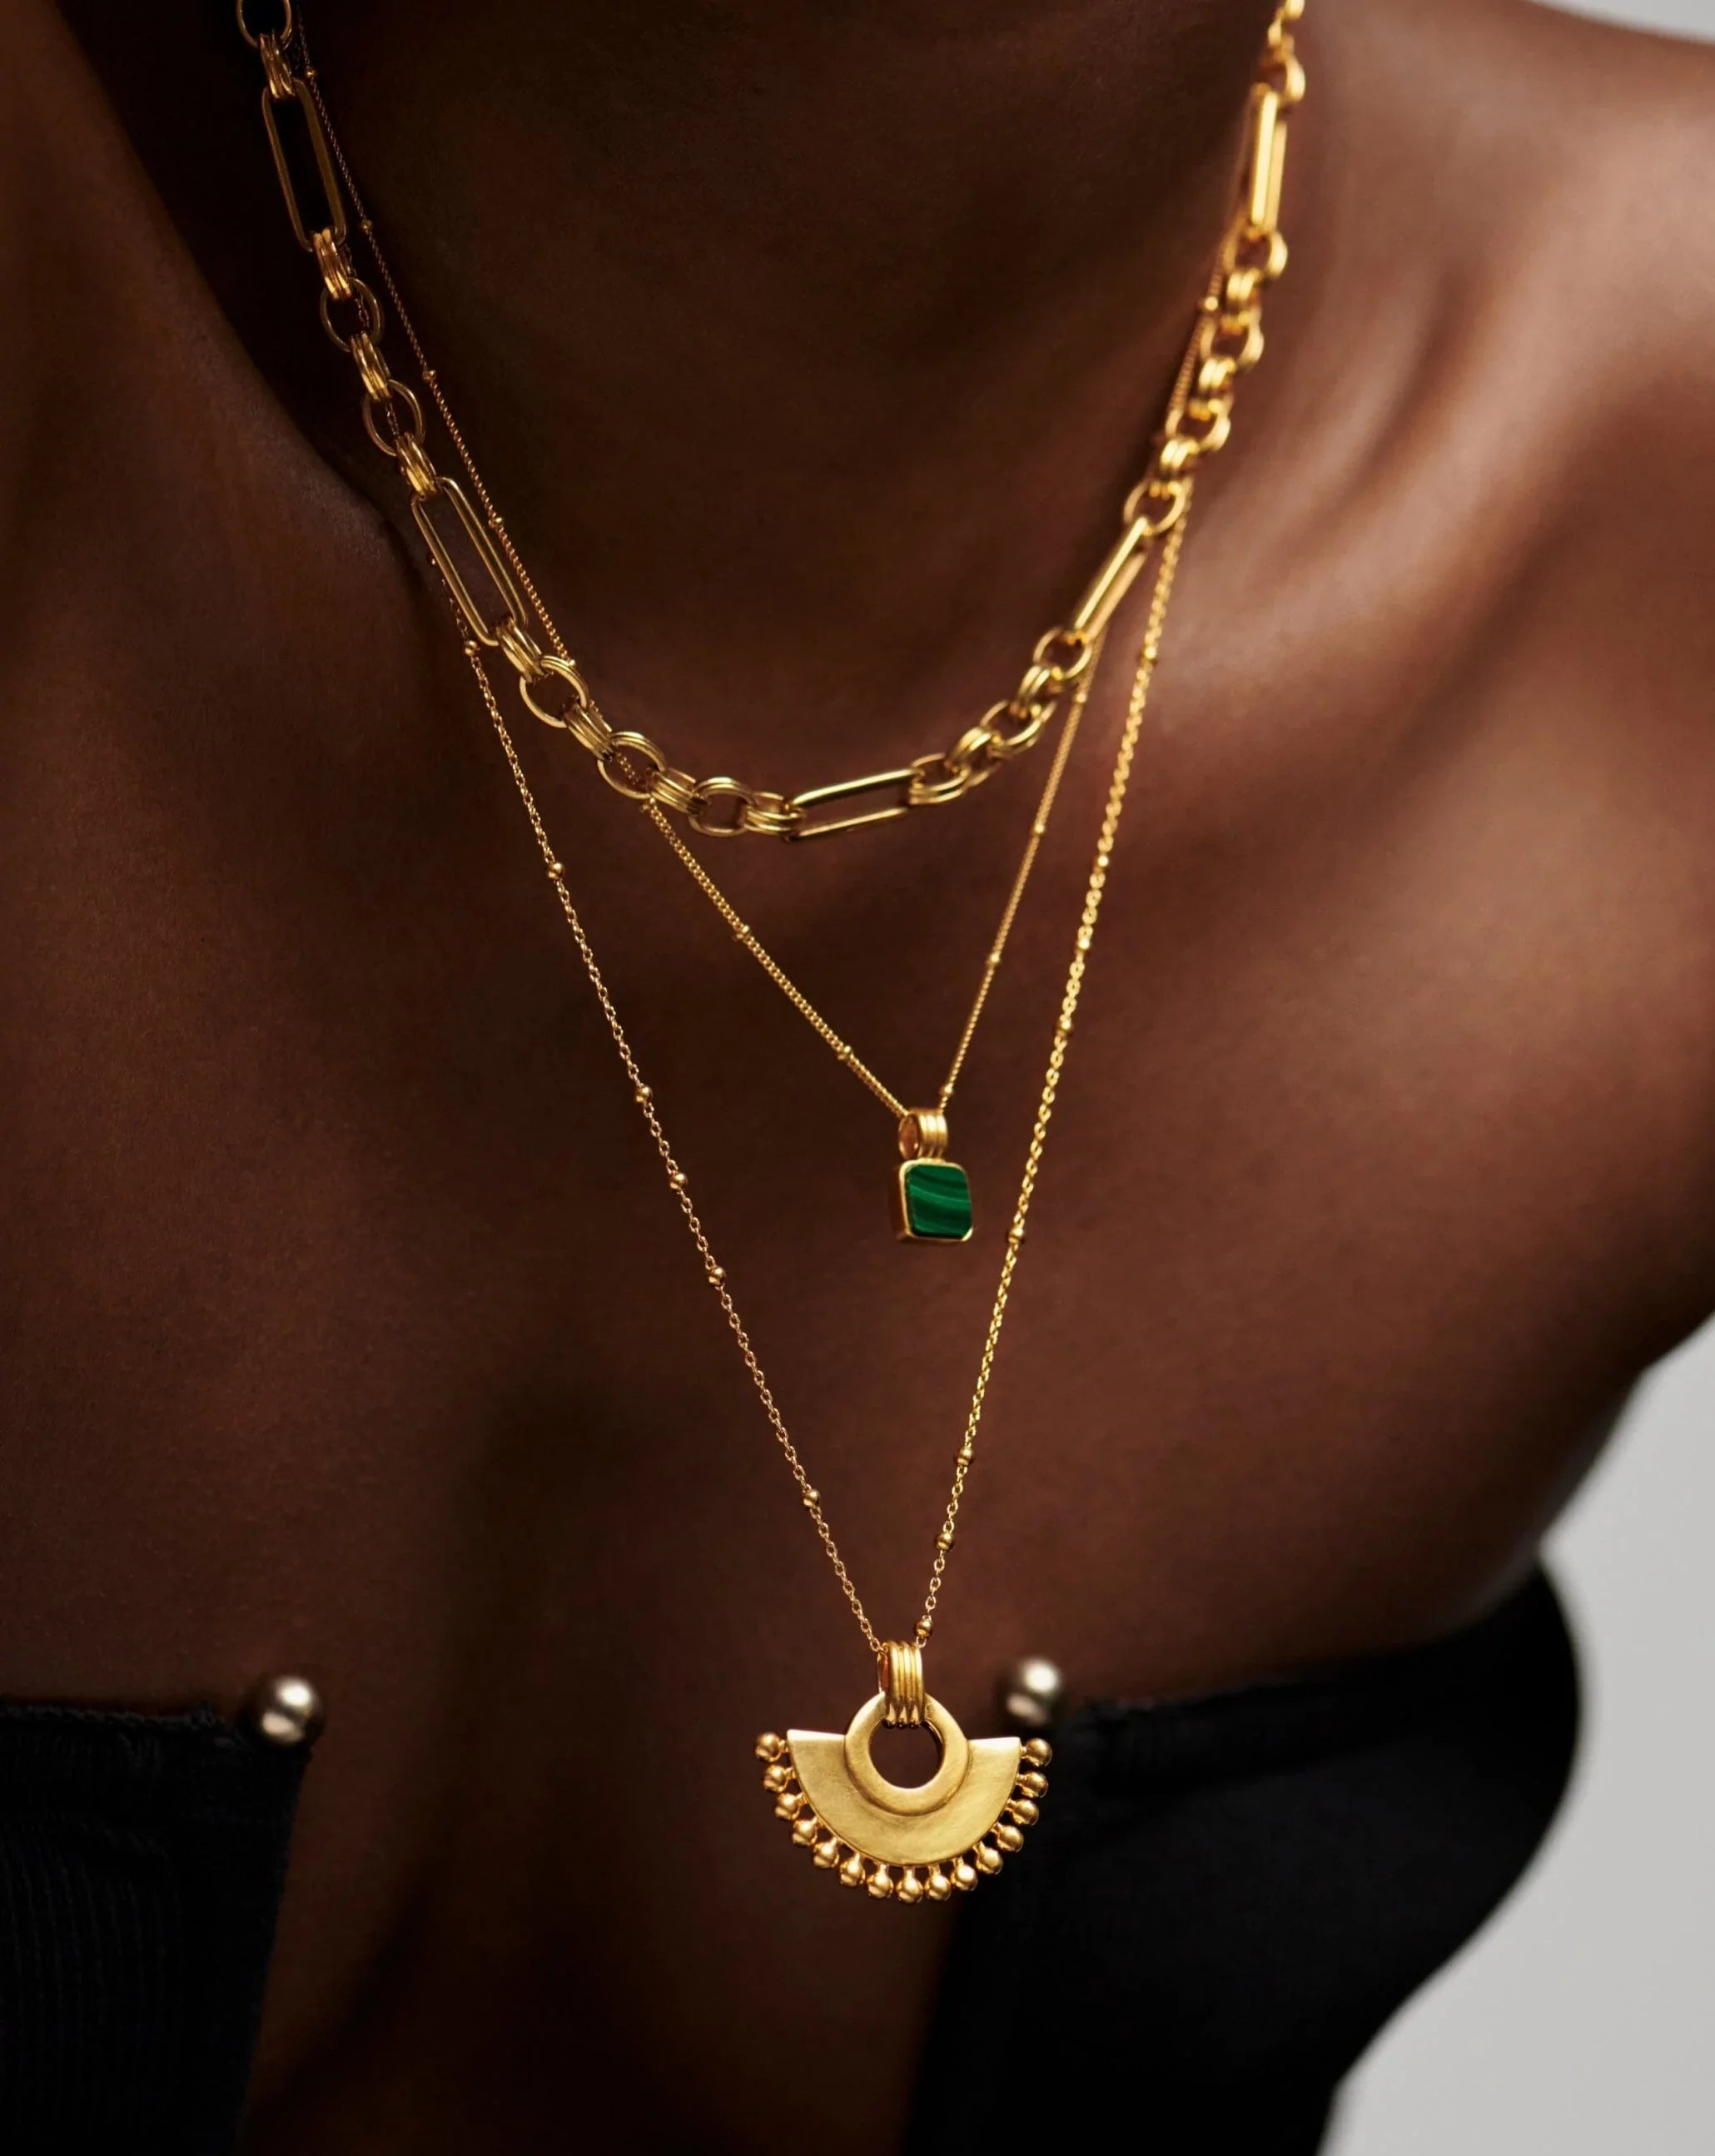 Zenyu Fan Necklace | 18ct Gold Plated Necklaces Missoma 